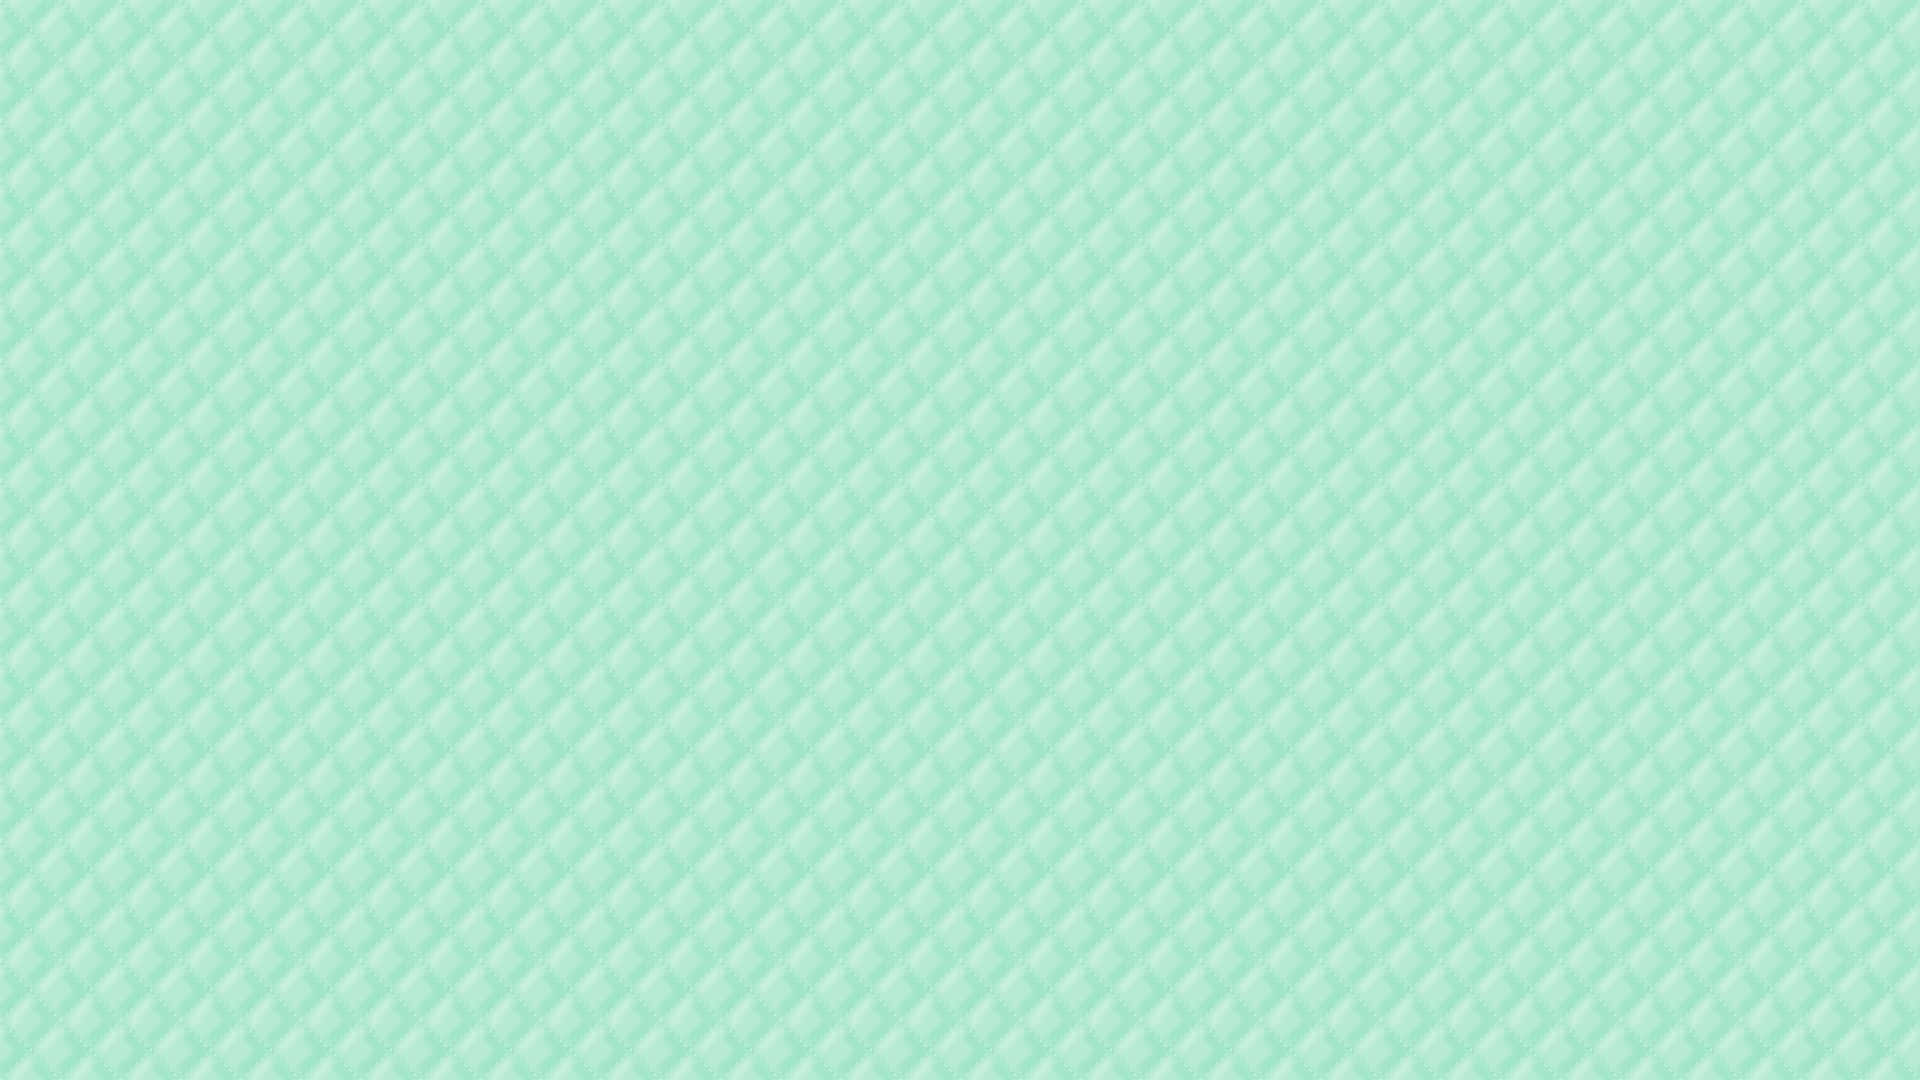 Magnificent mint green background